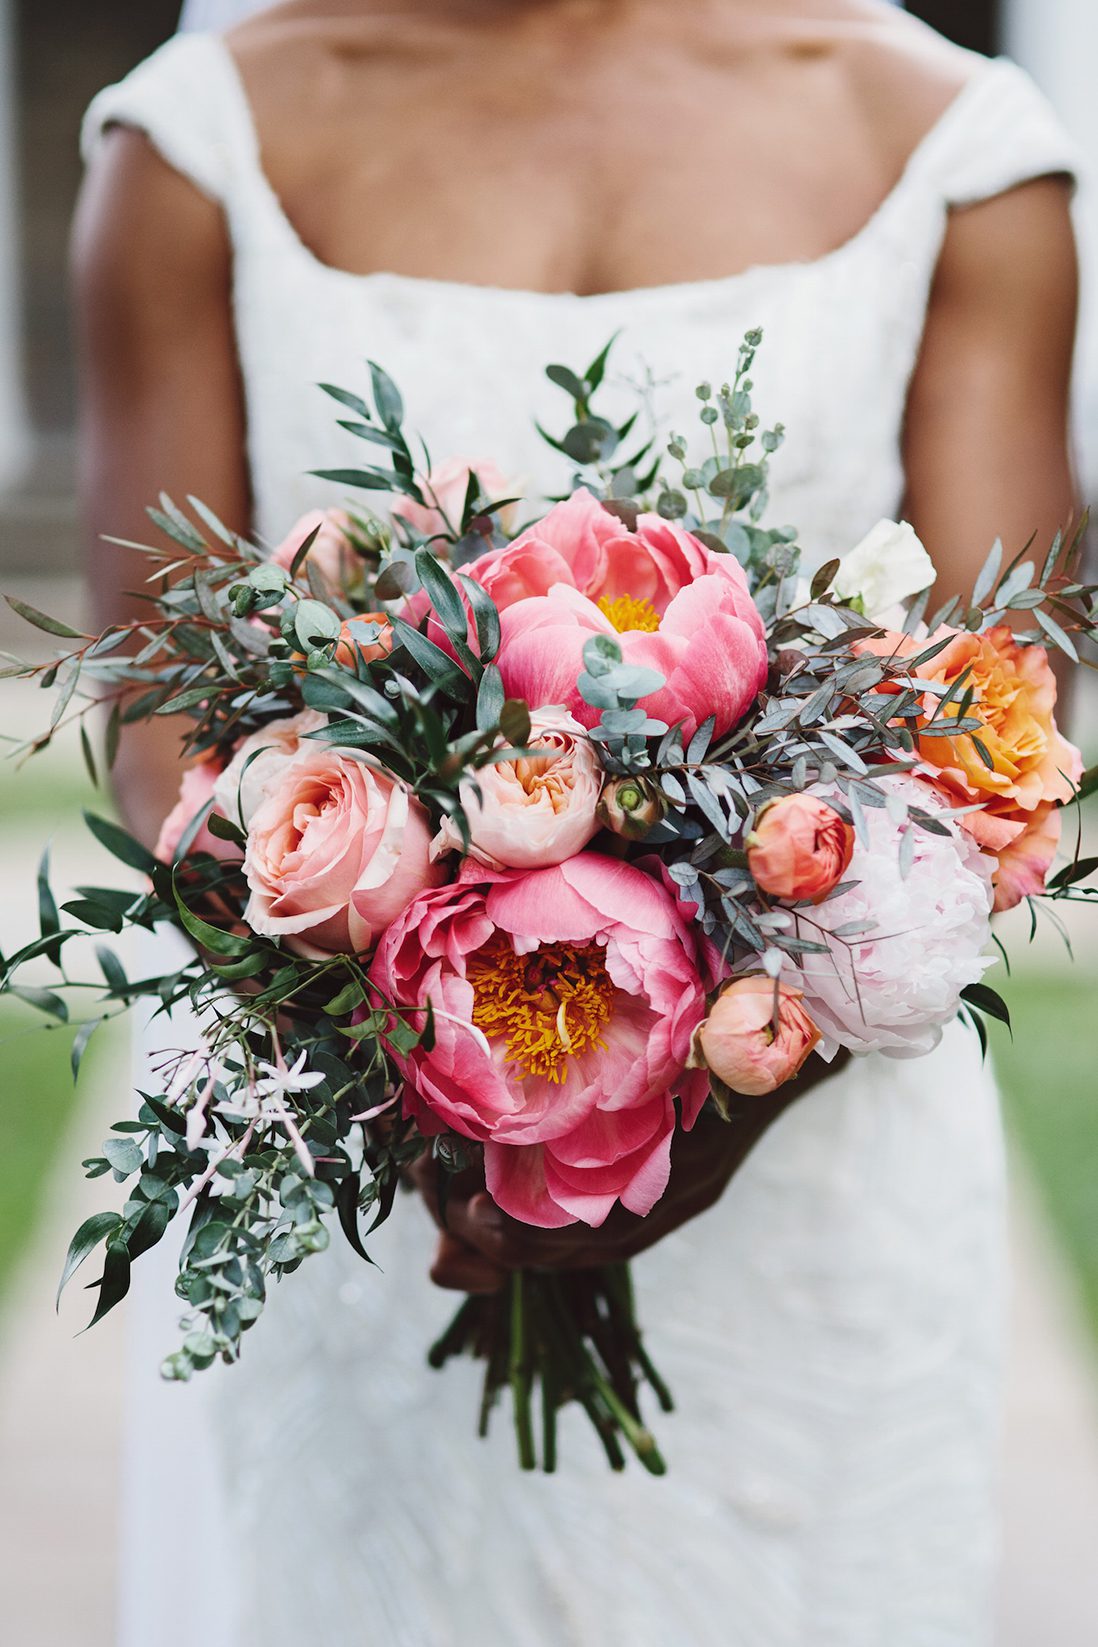 The Meanings Behind Your Wedding Flowers